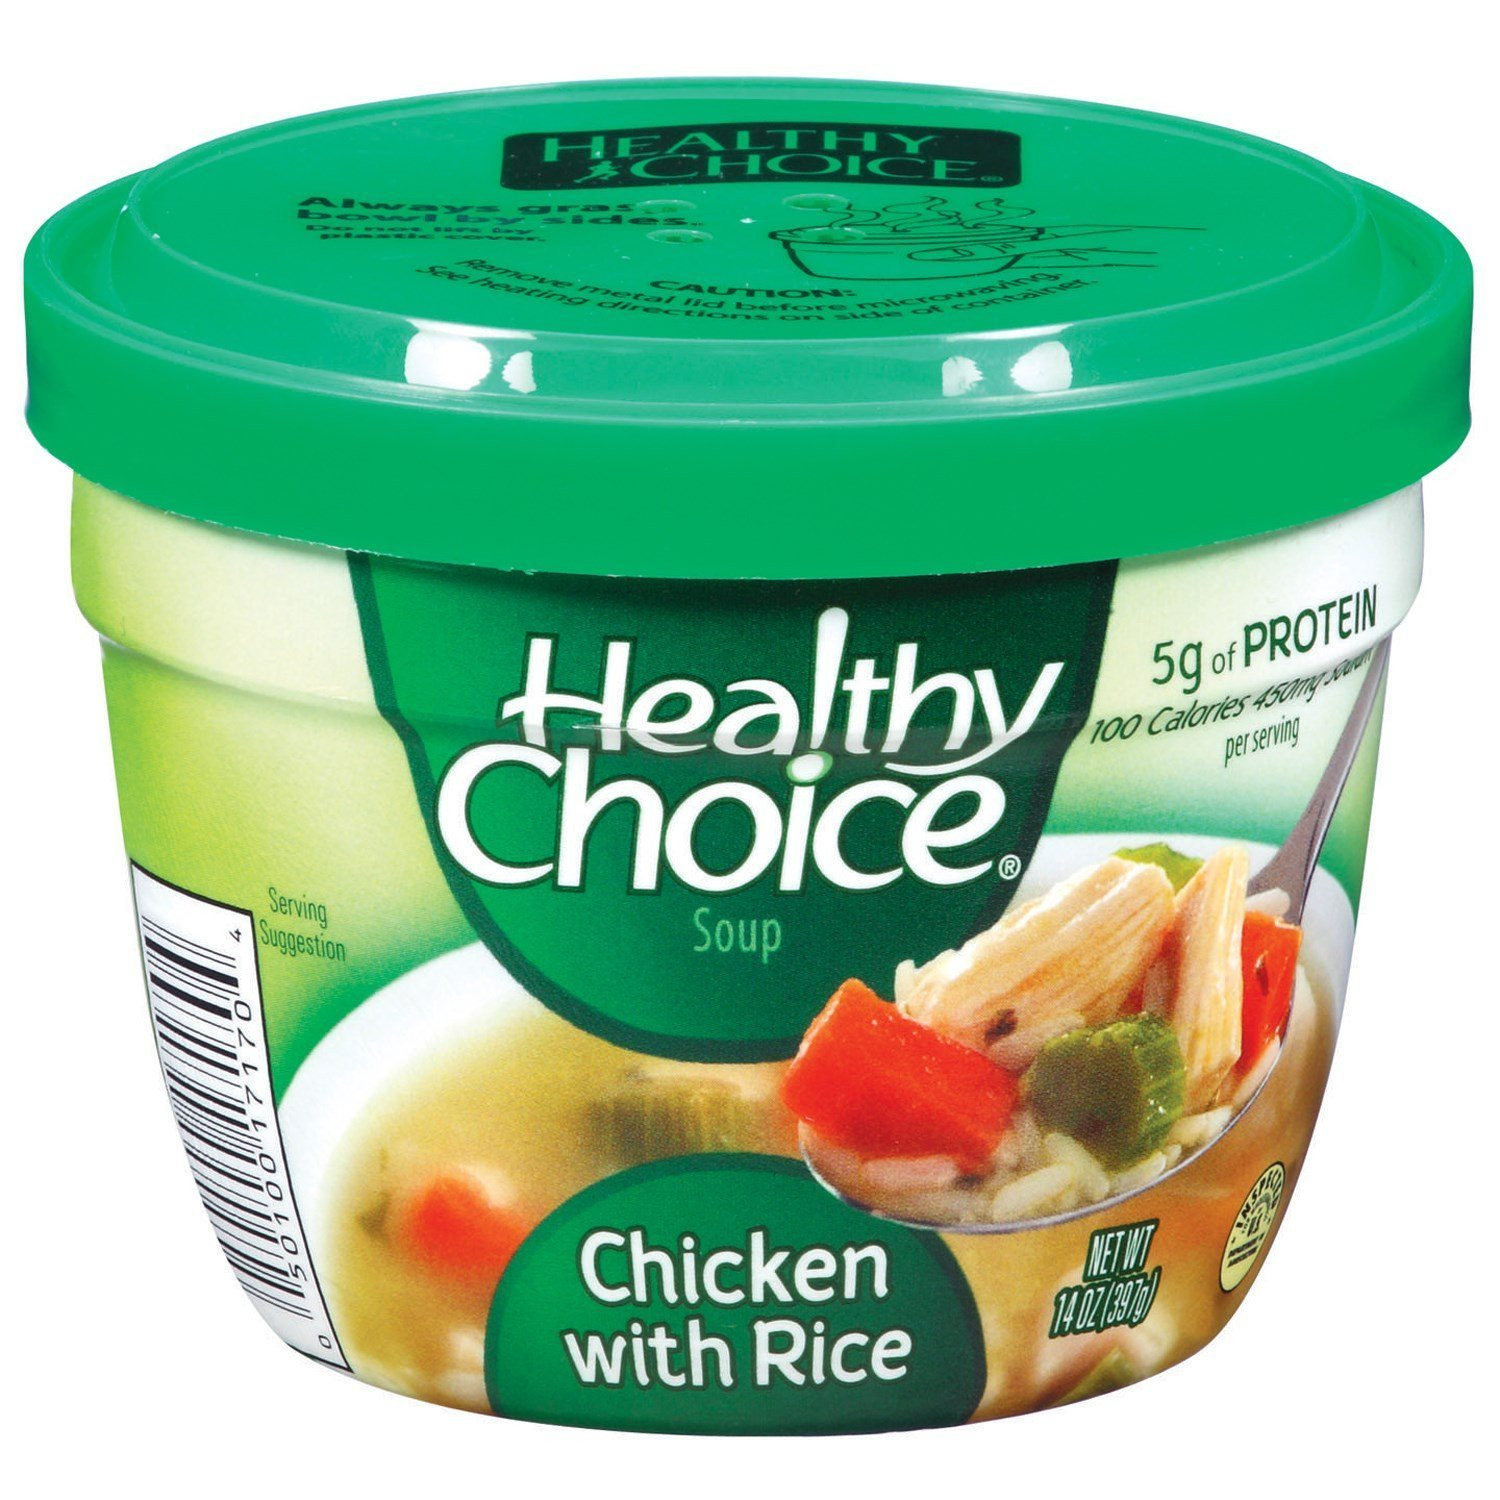 Healthy Choice Chicken Noodle Soup
 Amazon Healthy Choice Chicken Noodle Soup 14 Ounce